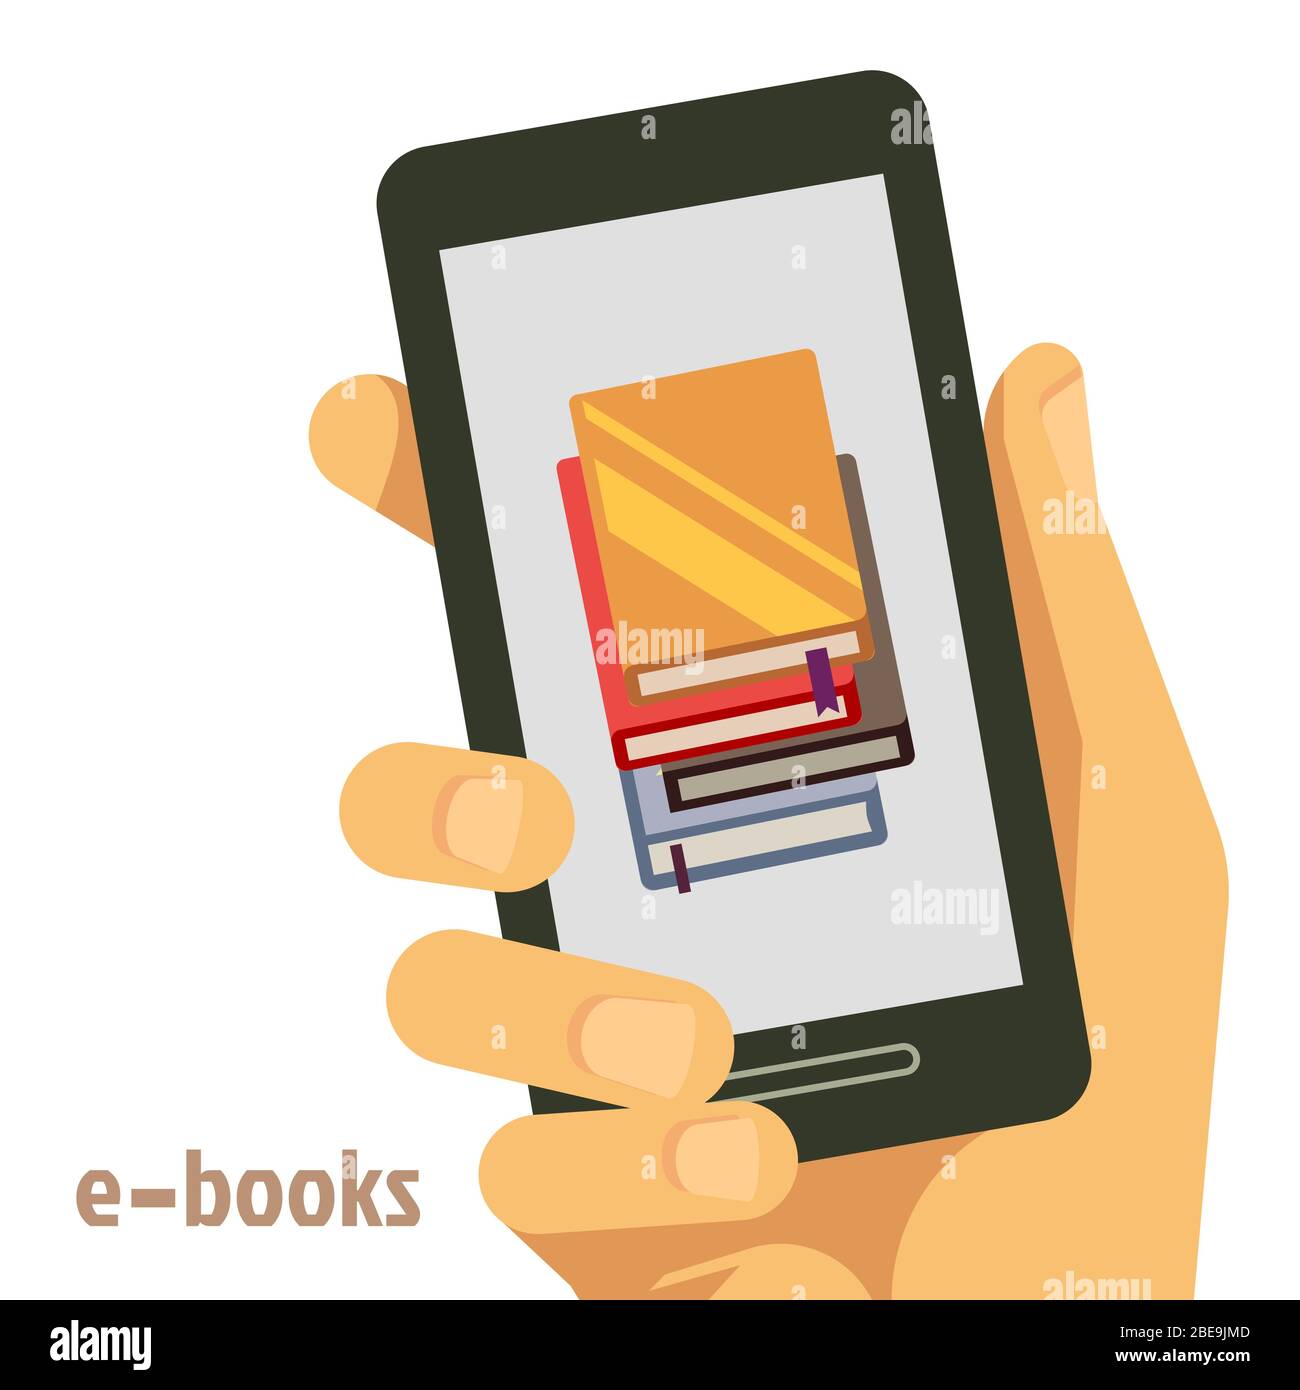 Flat e-books concept with smartphone in hand. E-book library on smartphone device, vector illustration Stock Vector